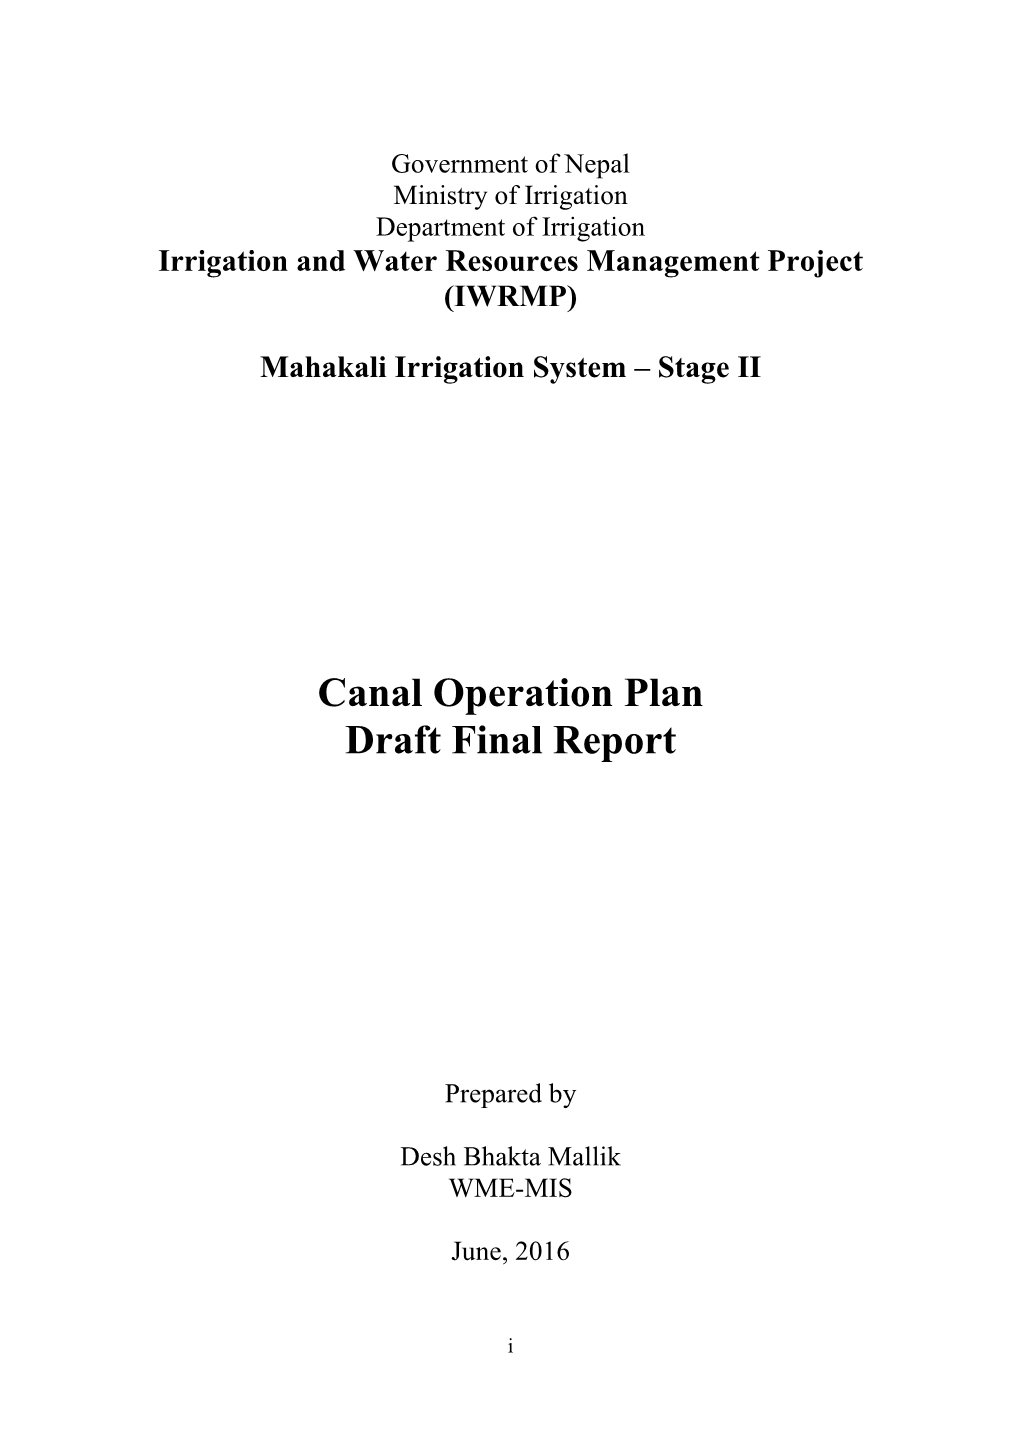 Canal Operation Plan Draft Final Report